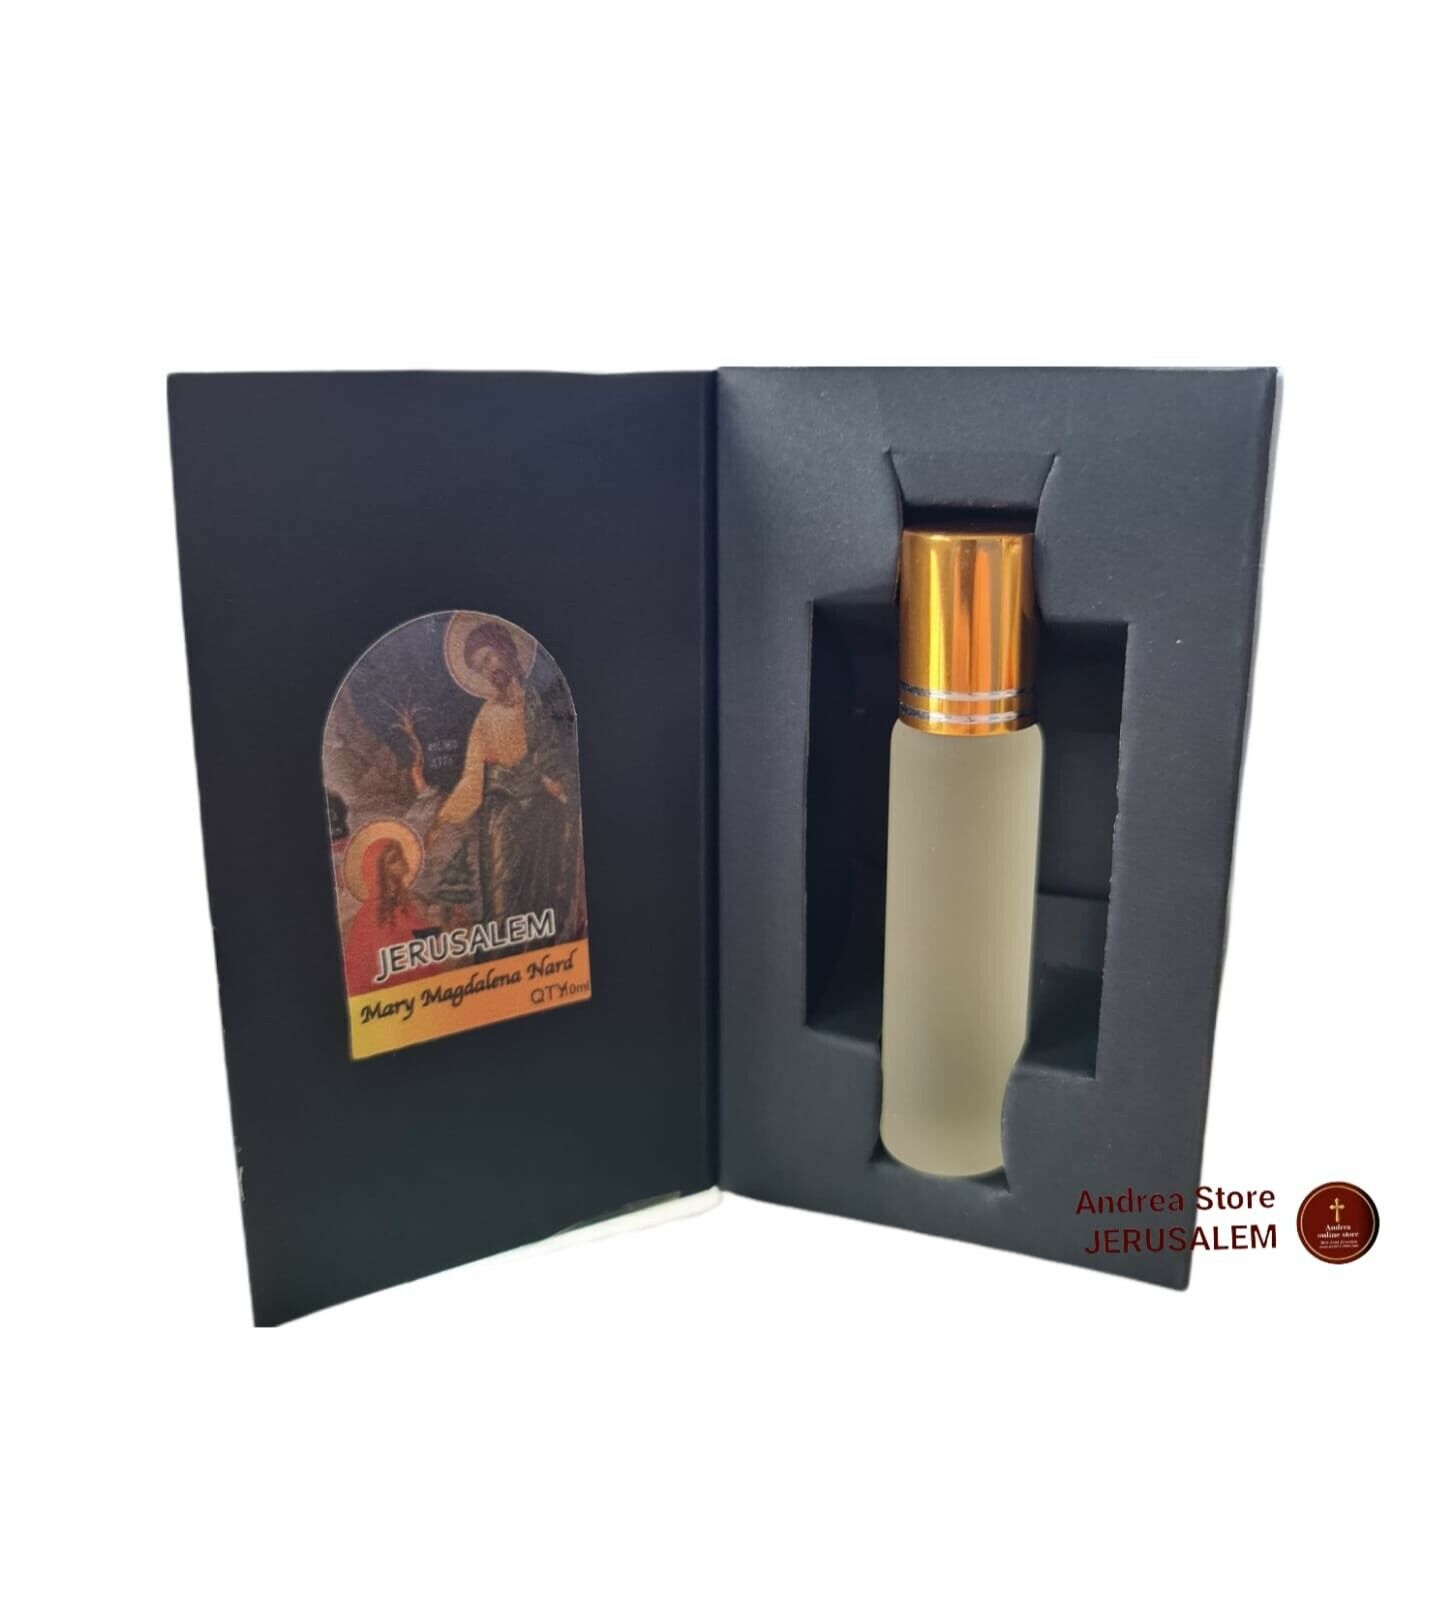 Mary Magdalene Nard From Jerusalem, Roll on 10ml bottle with nice gift box